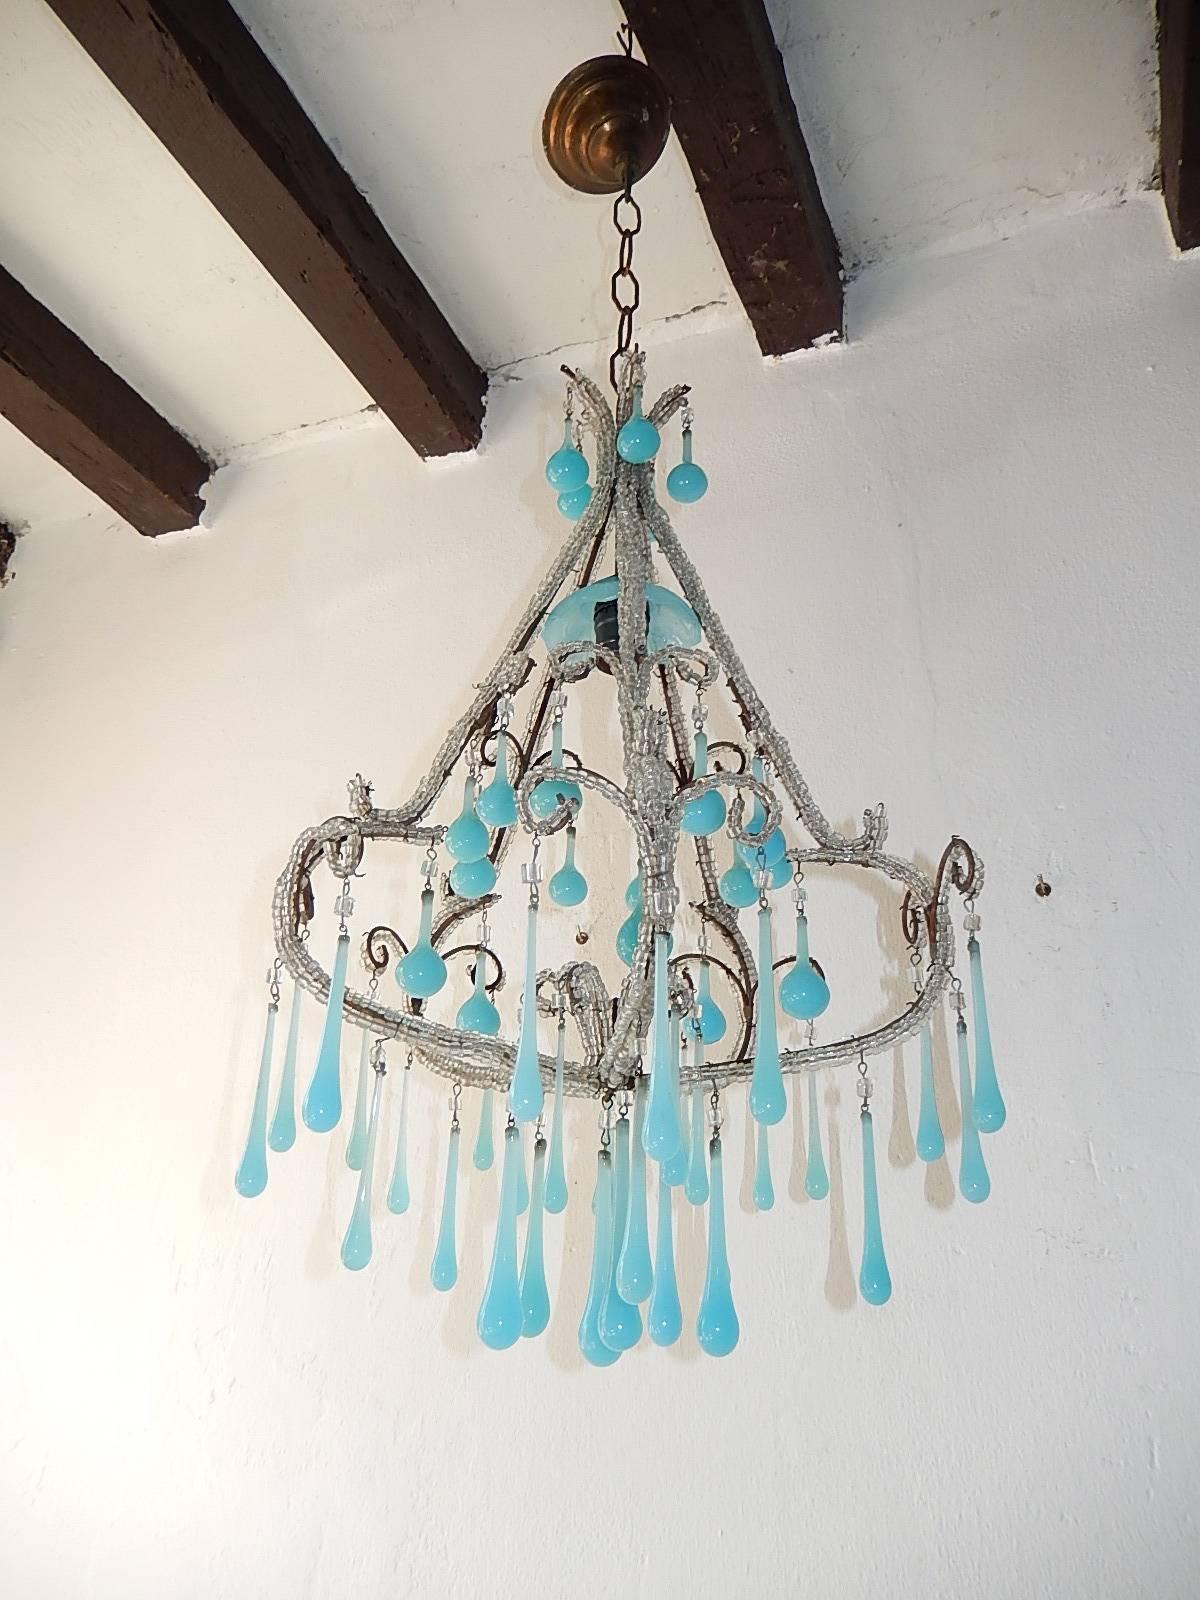 Housing one light, sitting under a blue opaline bobeche. Rewired and ready to hang. Gold gilt metal. Macaroni crystal triple beading. Adorning blue opaline drops in different shapes and sizes. Free priority shipping from Italy. Adding another 11